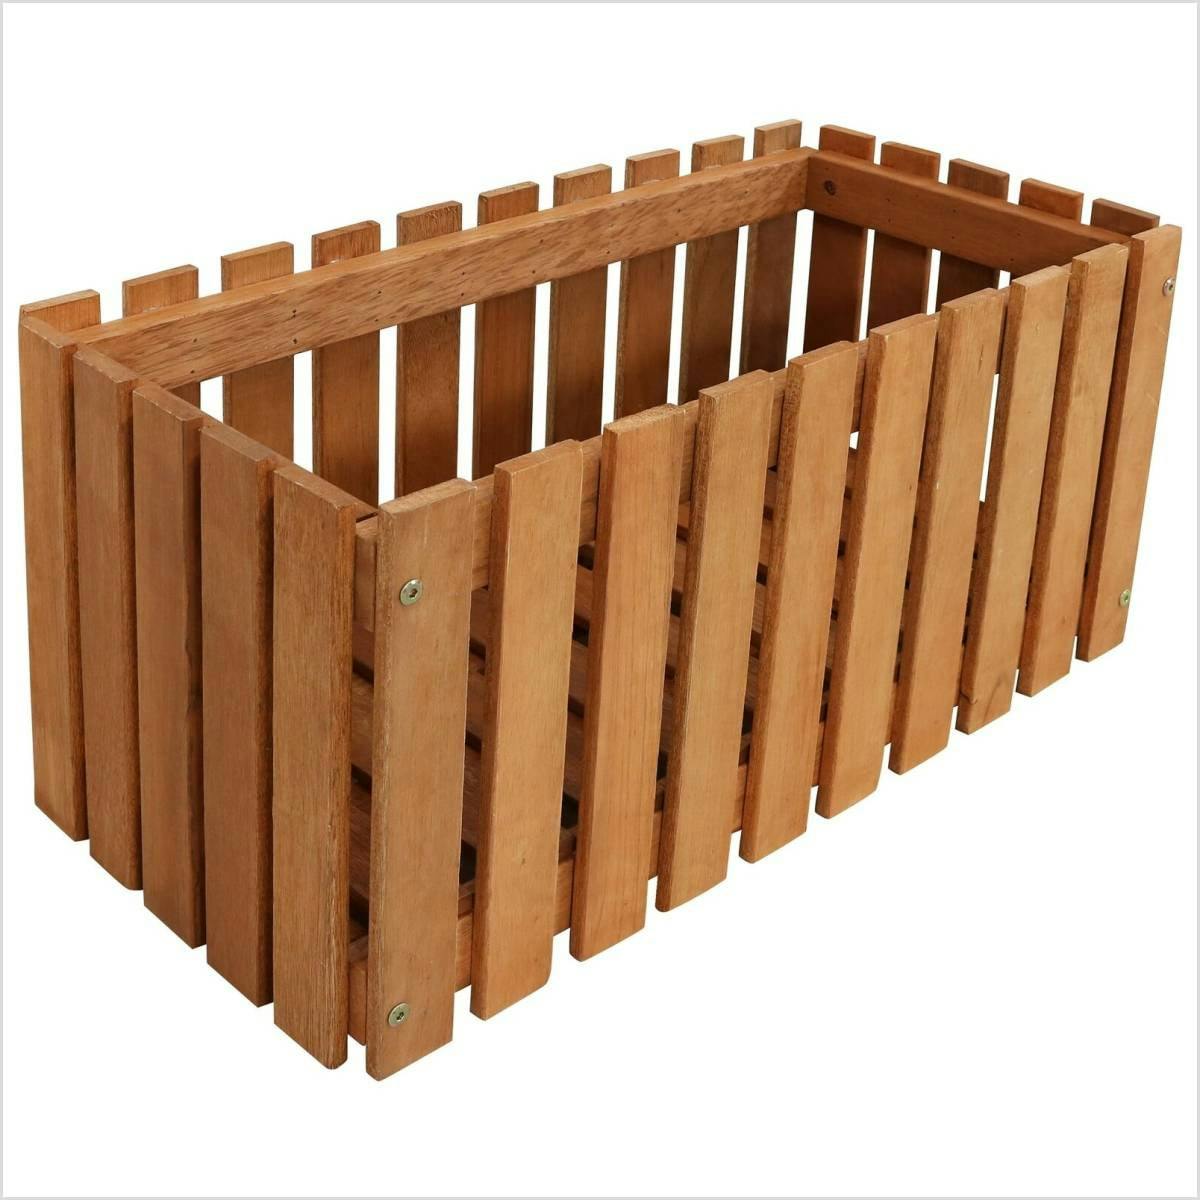 Meranti Wood Picket-Style Planter Box for Outdoor Spaces - 24" Brown